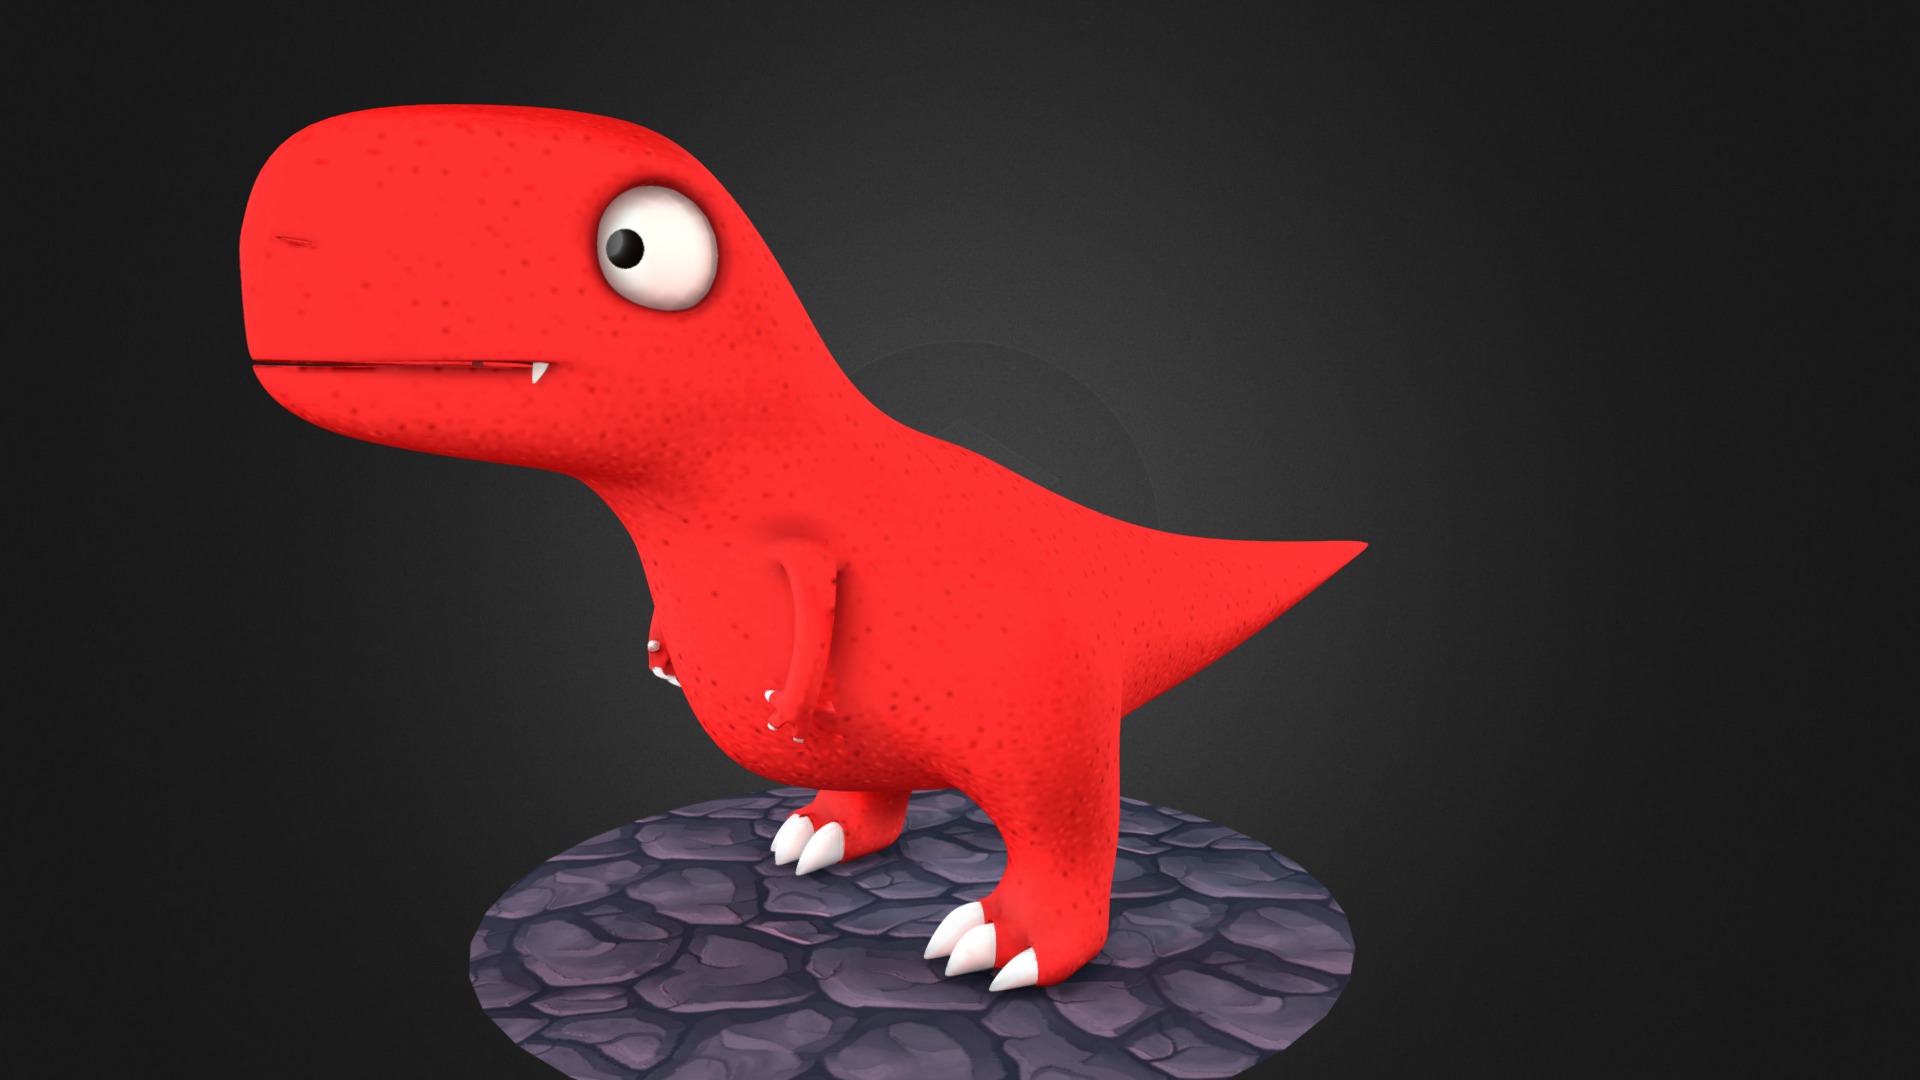 3D model Dino - This is a 3D model of the Dino. The 3D model is about a red toy dragon.